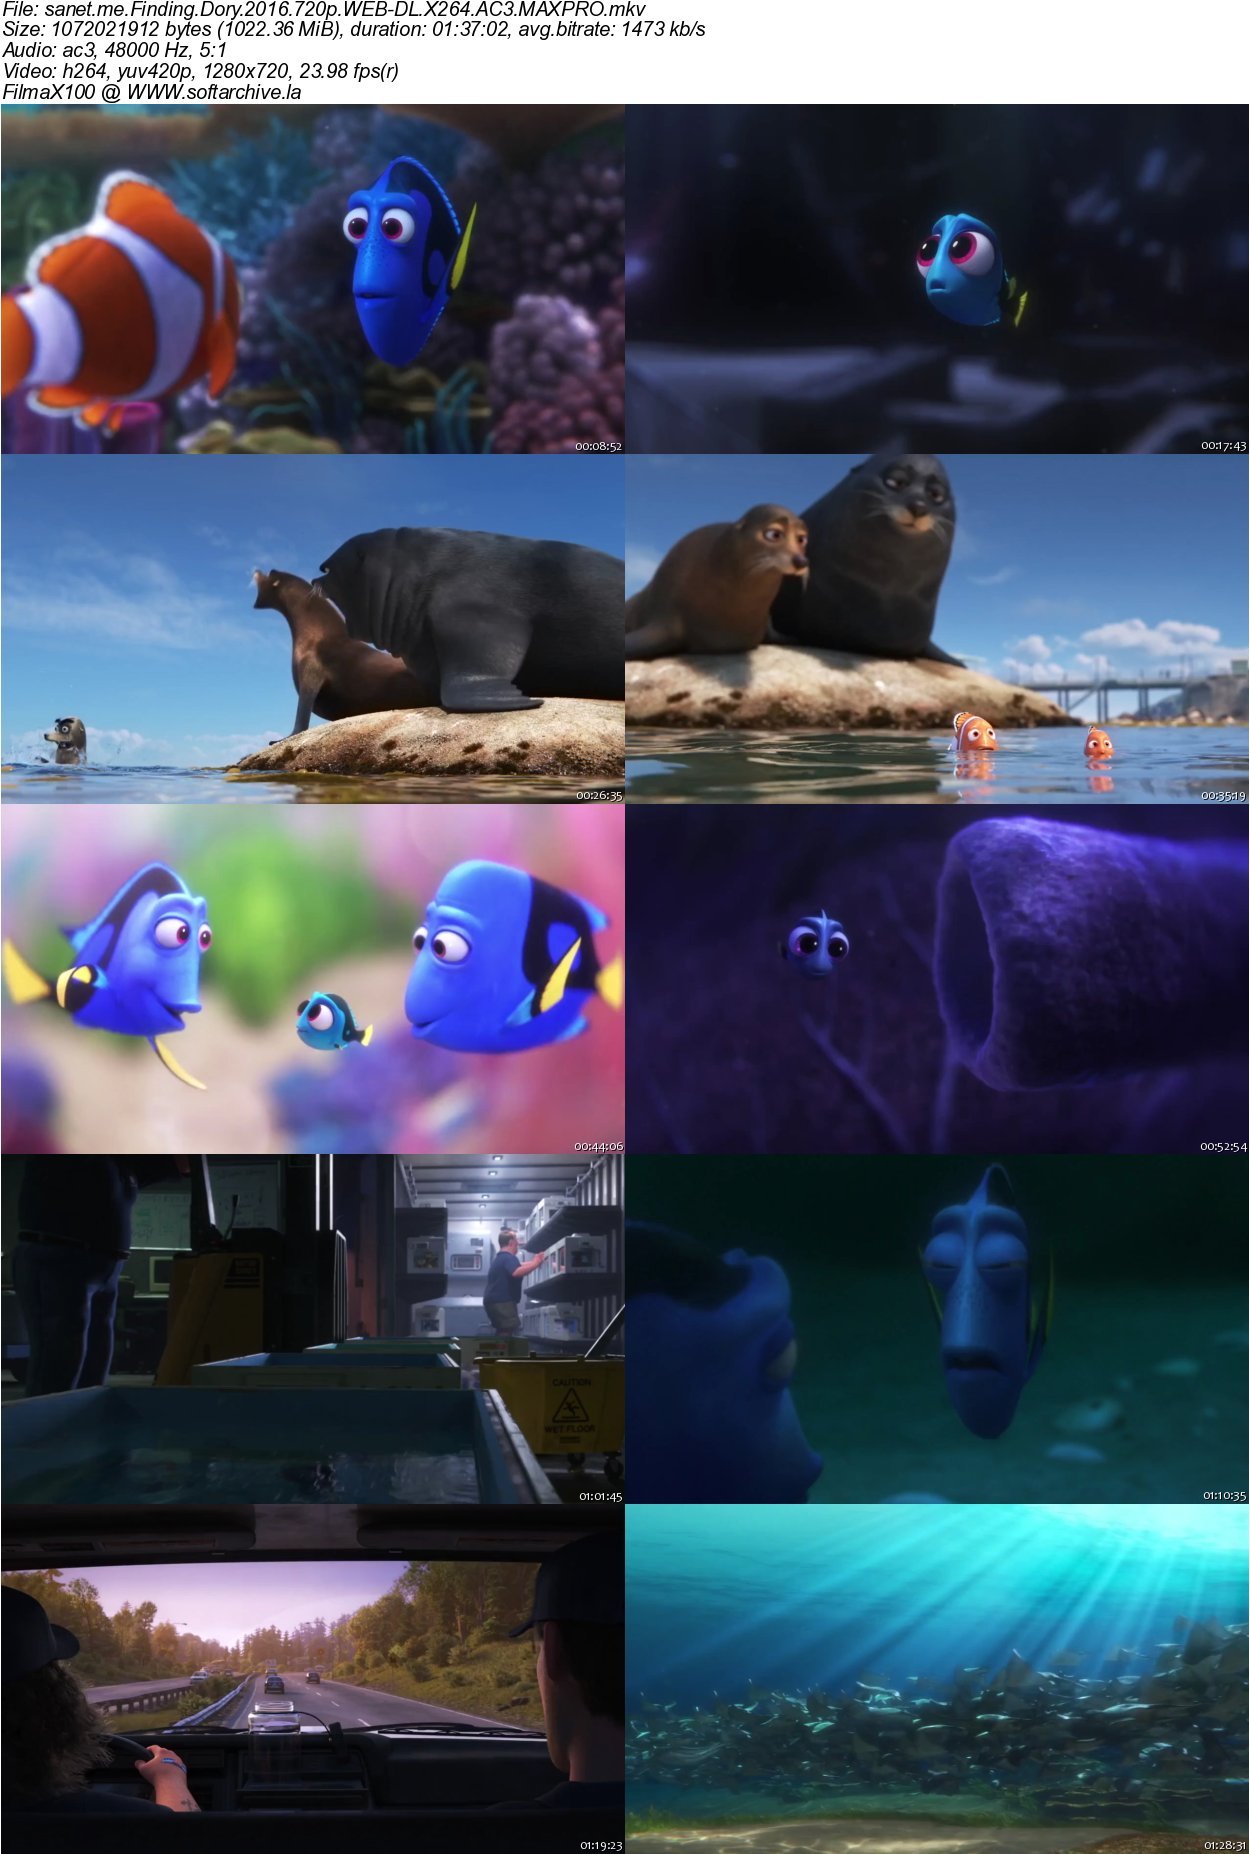 watch finding dory online full